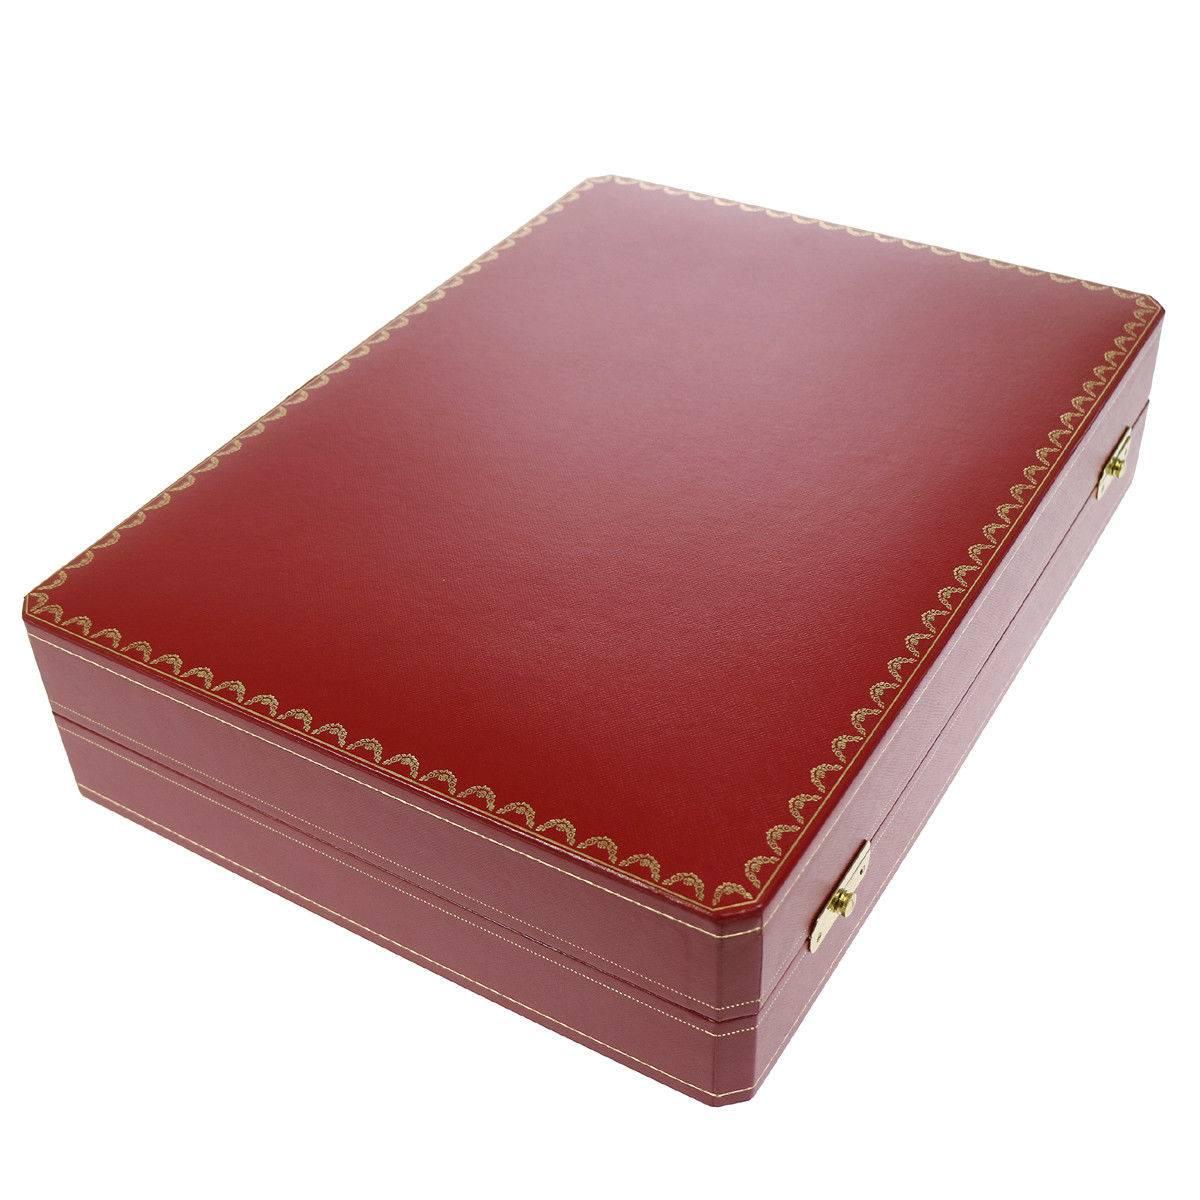 A wonderful gift idea! Cartier Red Leather Men's Women's Travel Storage Vanity Watch Case Trunk in Box

Leather
Gold tone hardware
Push lock closures
Woven lining
Measures 15.75" W x 3.5" H x 11.5" D
Includes removable inserts as